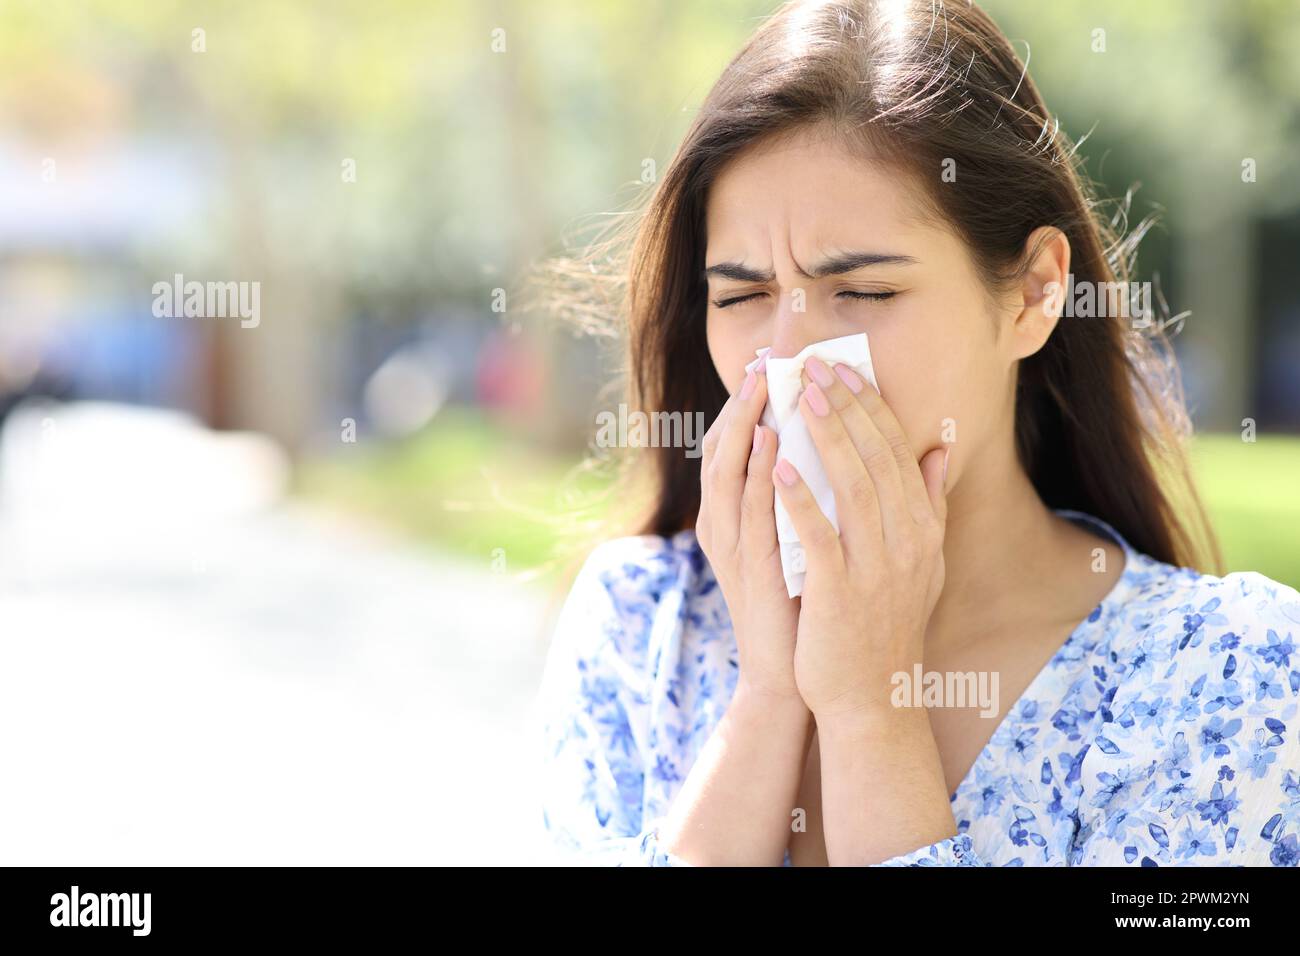 Ill woman blowing or coughing on tissue in the street Stock Photo